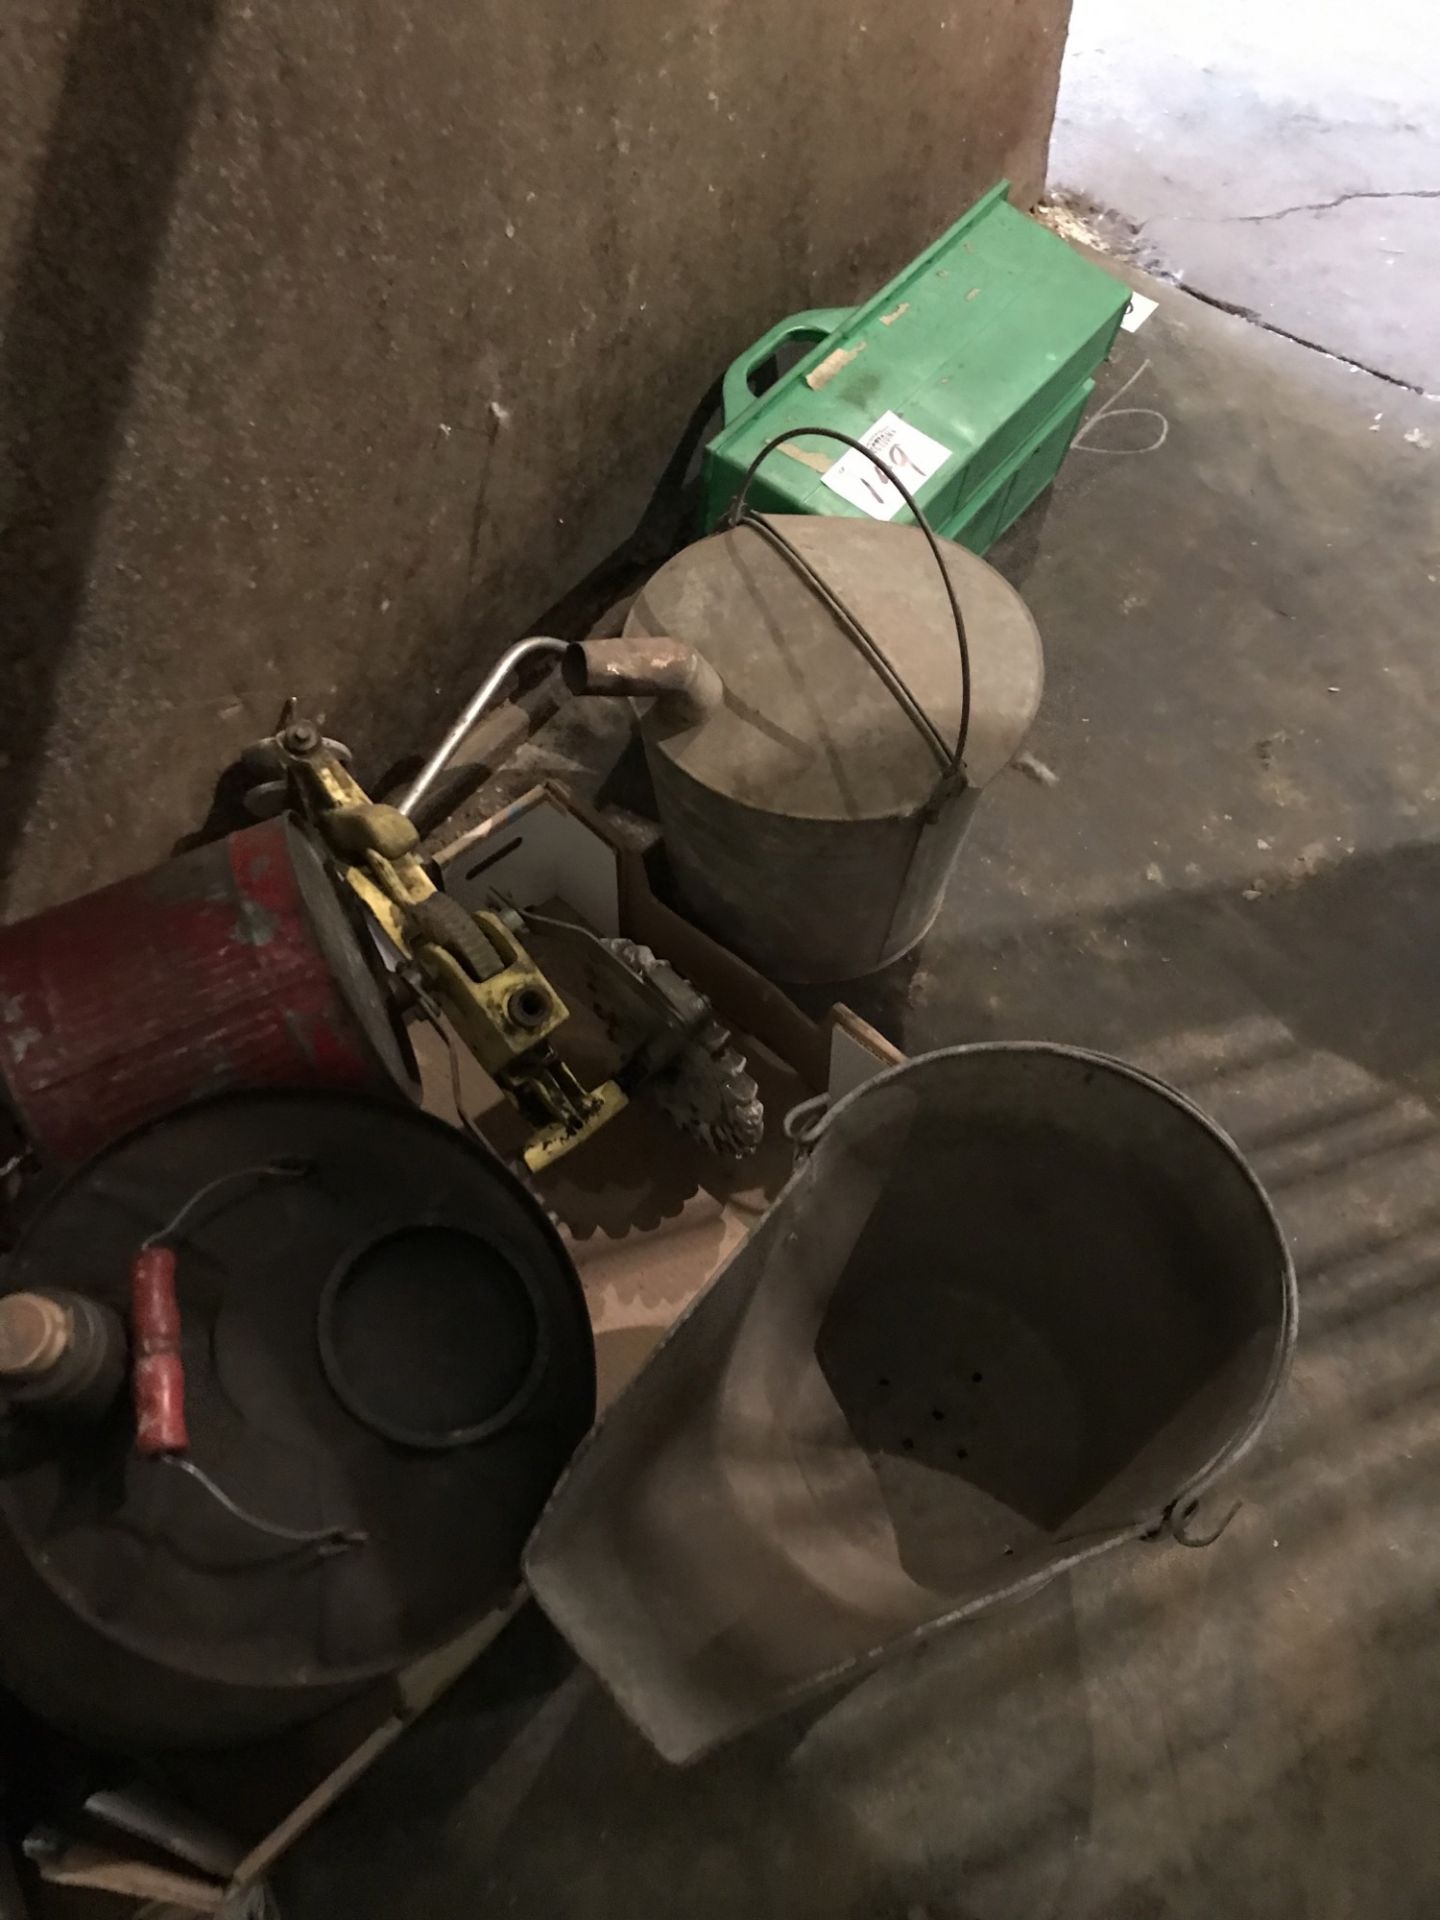 Coal Pail, gas can, tool caddy, oil pail - Image 2 of 2